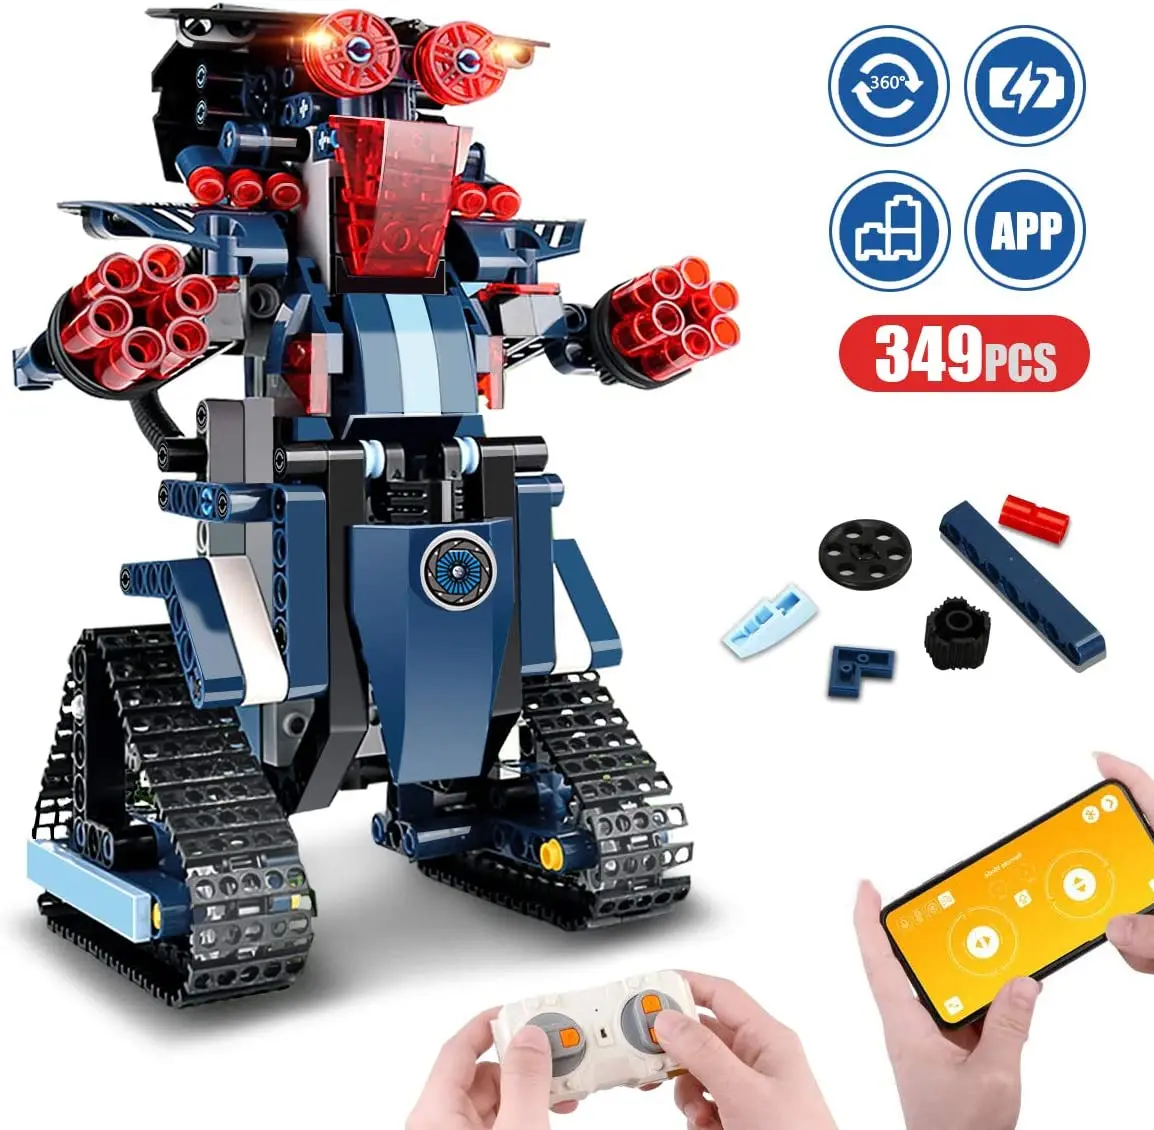 Remote Control Engineering Science Education STEM Robot Building Kits for Kids 